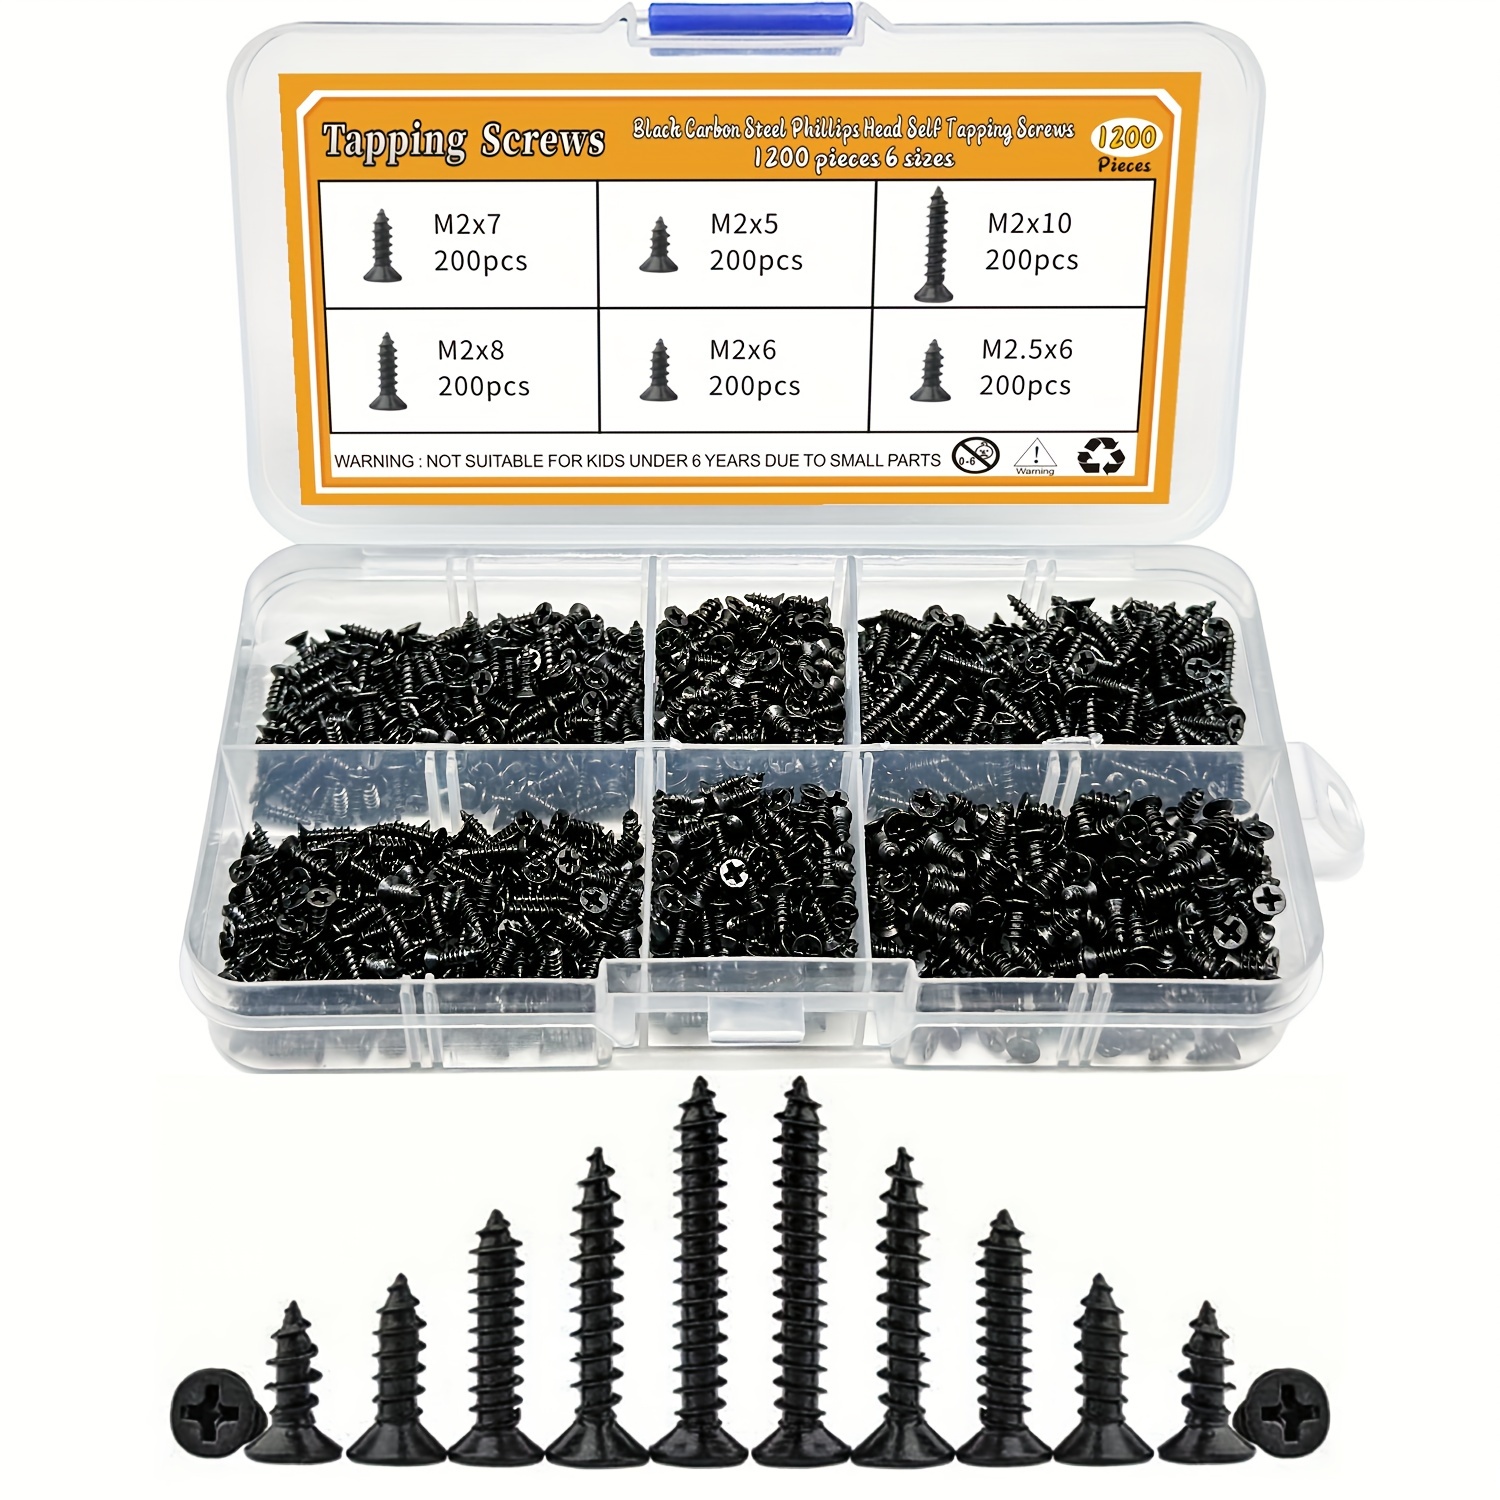 50pcs M1 M1.2 M1.4 M1.7 M2 M2.6 M3 M3.5 M4 Mini 304 Stainless Steel Cross  Phillips Flat Countersunk Head Self-Tapping Wood Screw (Color : 5mm, Size 